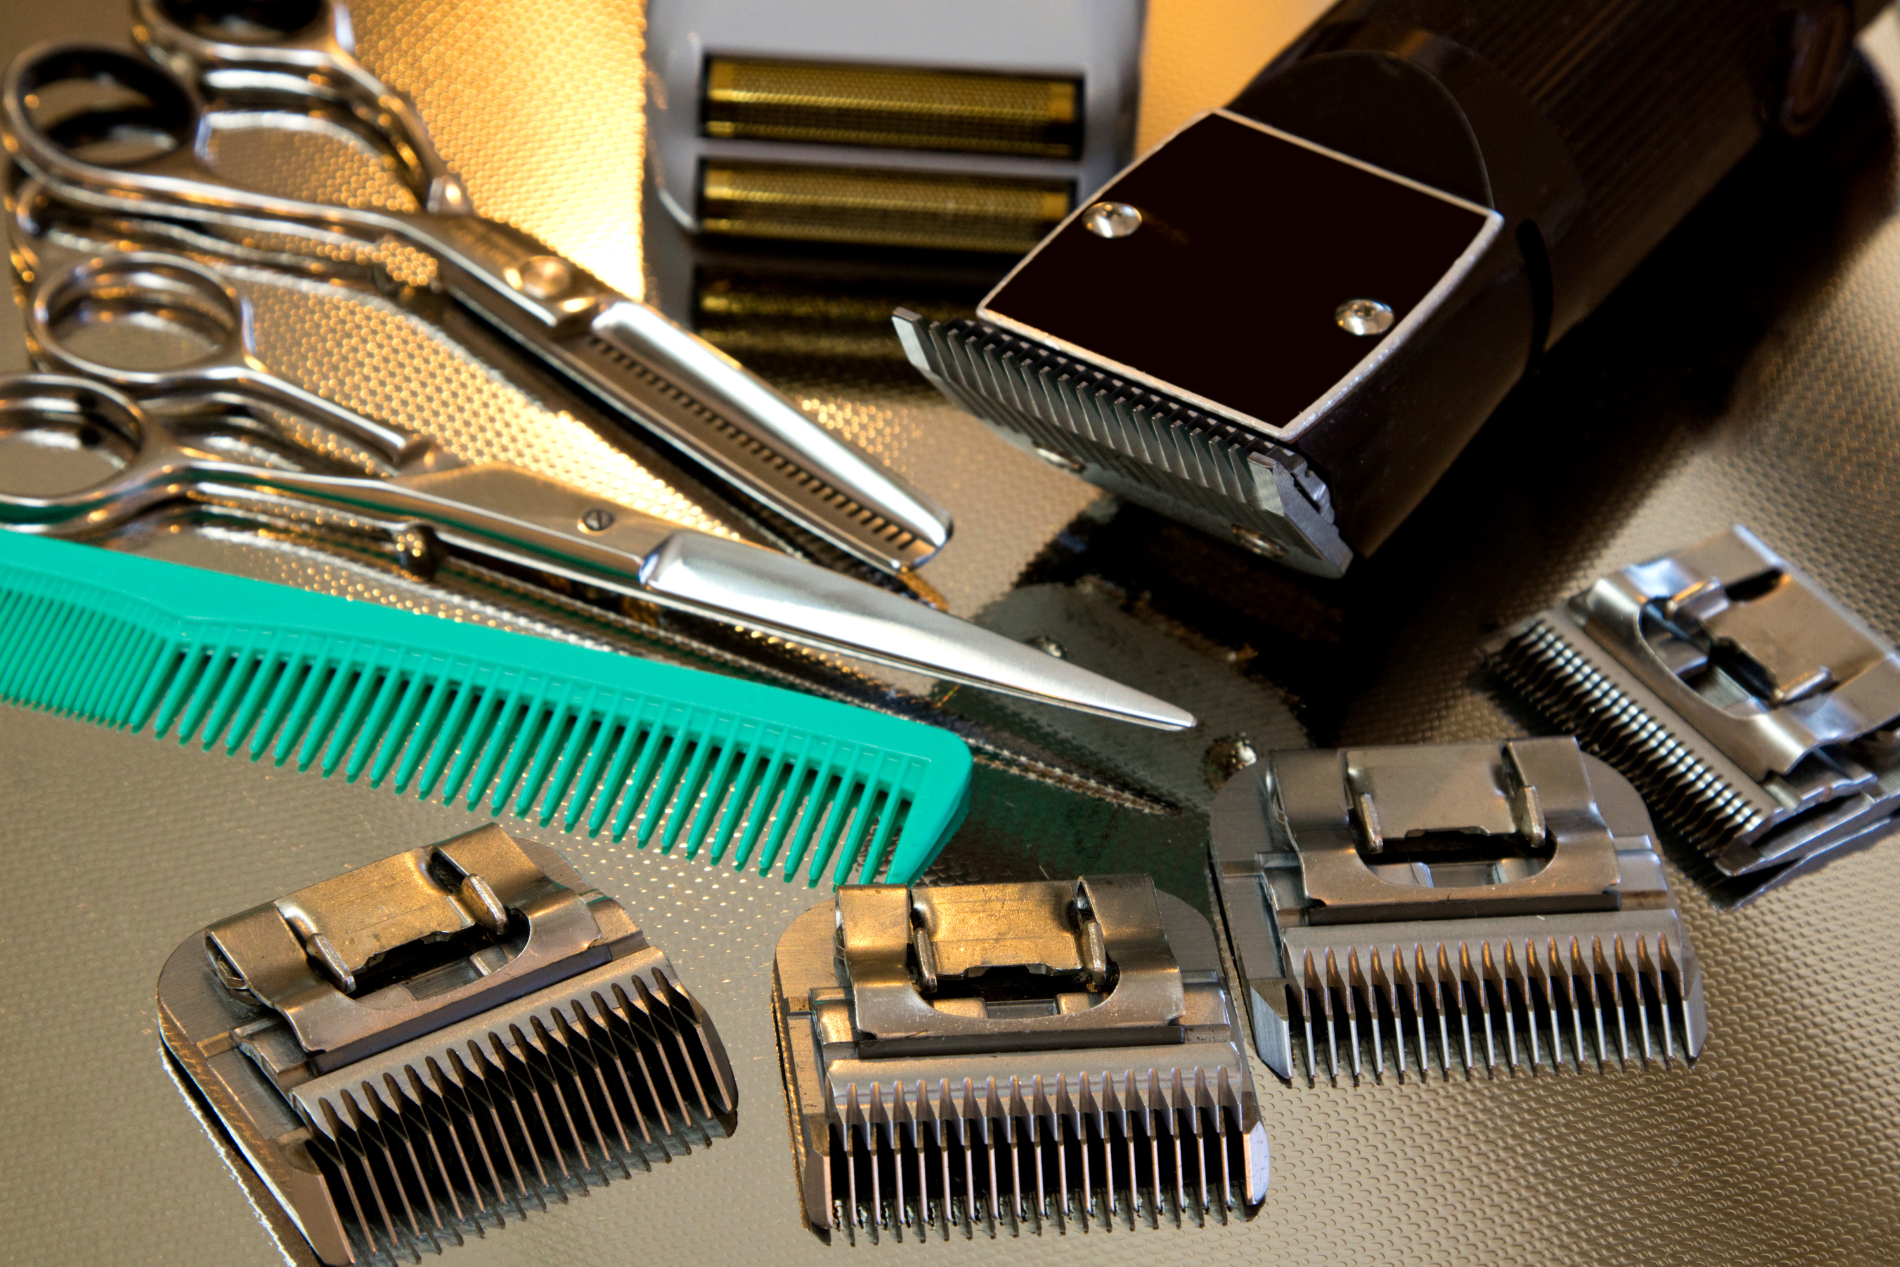 types of Hair care trim blades 